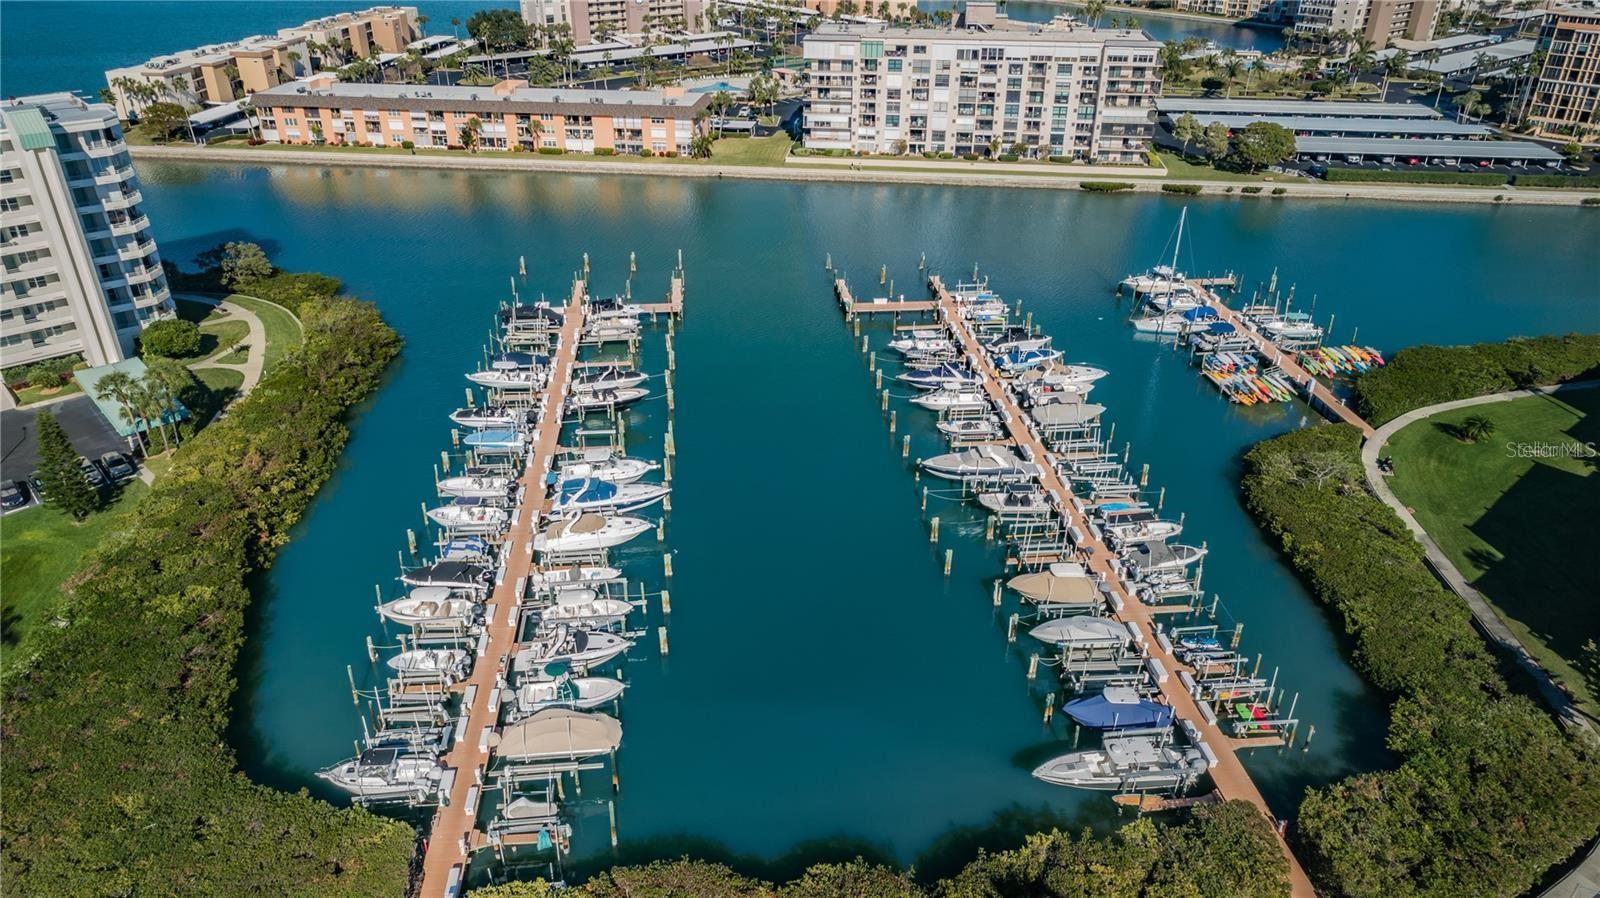 Marina -boat slips can be available for rent or purchase